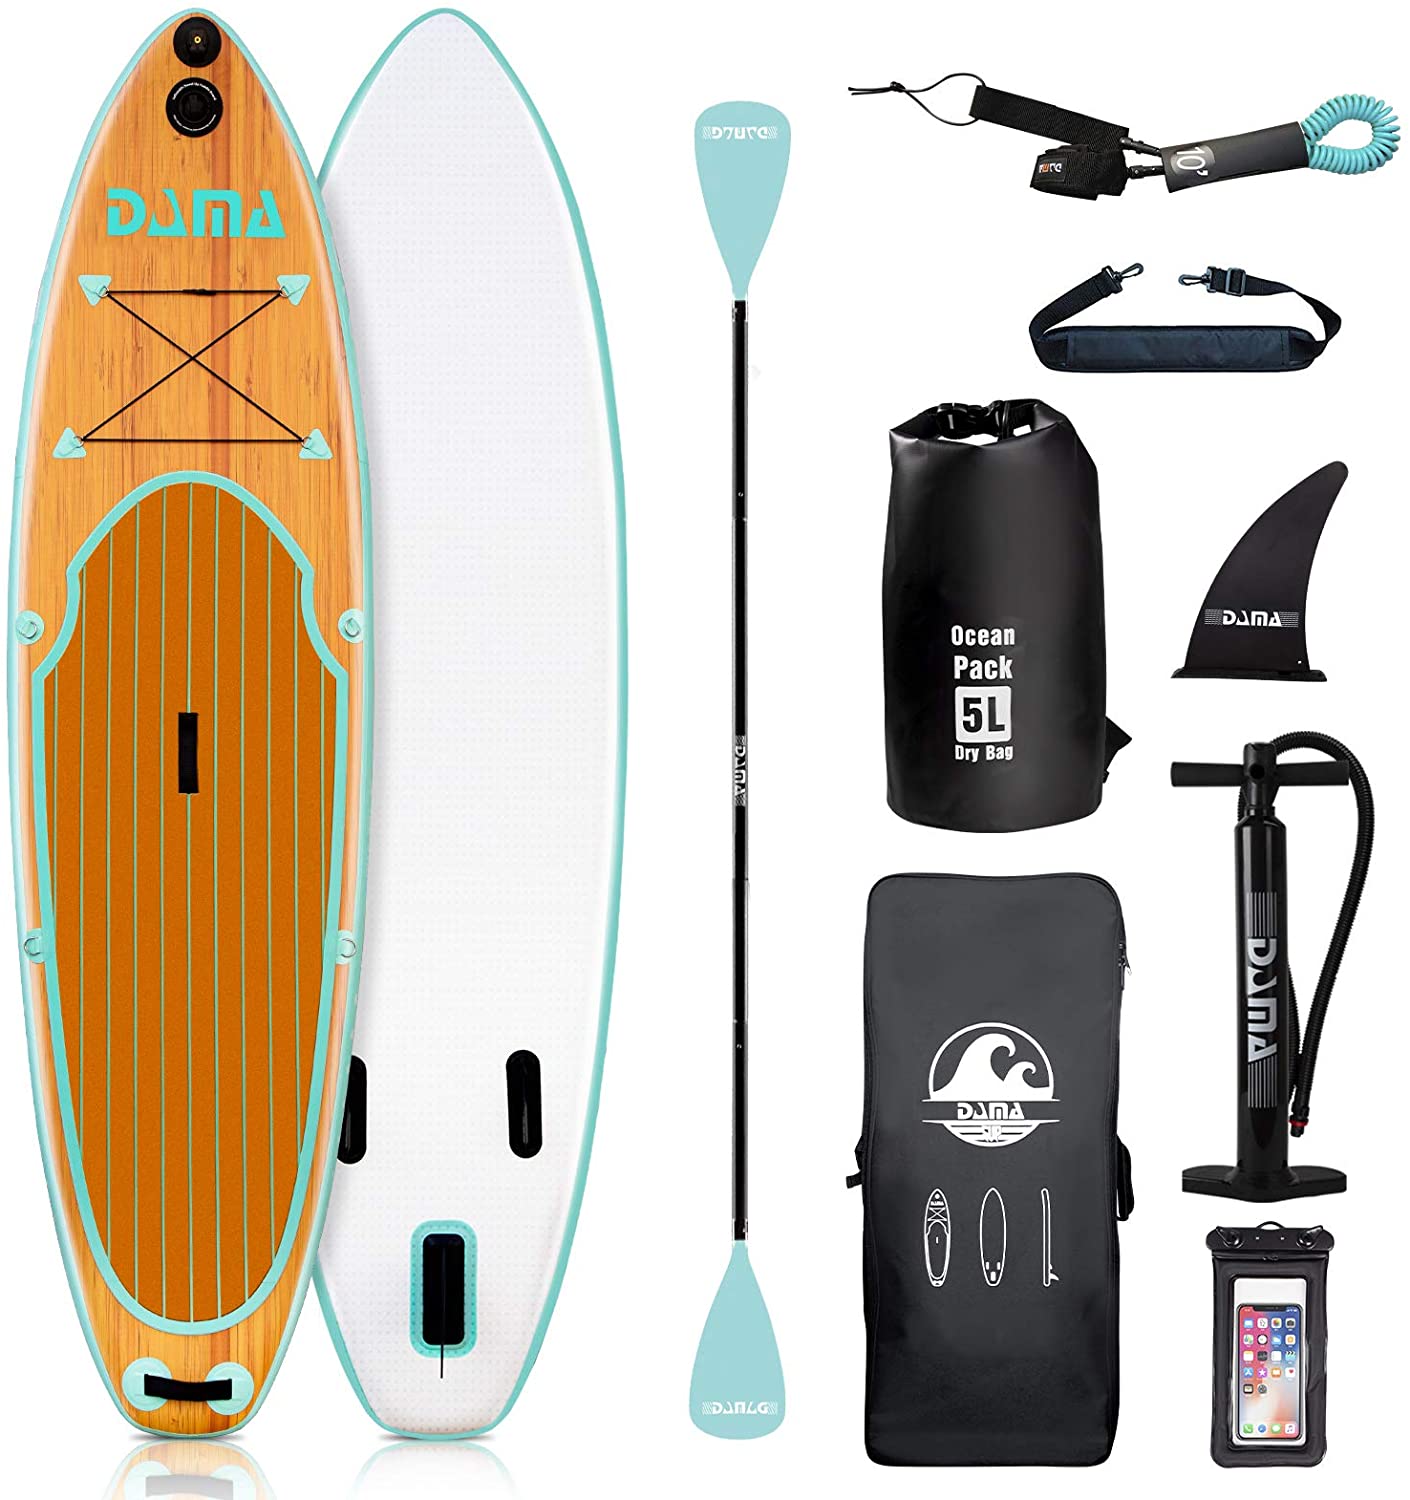 DAMA Inflatable Stand Up Paddle Board 11'x33 x6, Inflatable Yoga Board,  Dry Bags, Camera Seat, Floating Paddle, Hand Pump, Board Carrier, Durable 